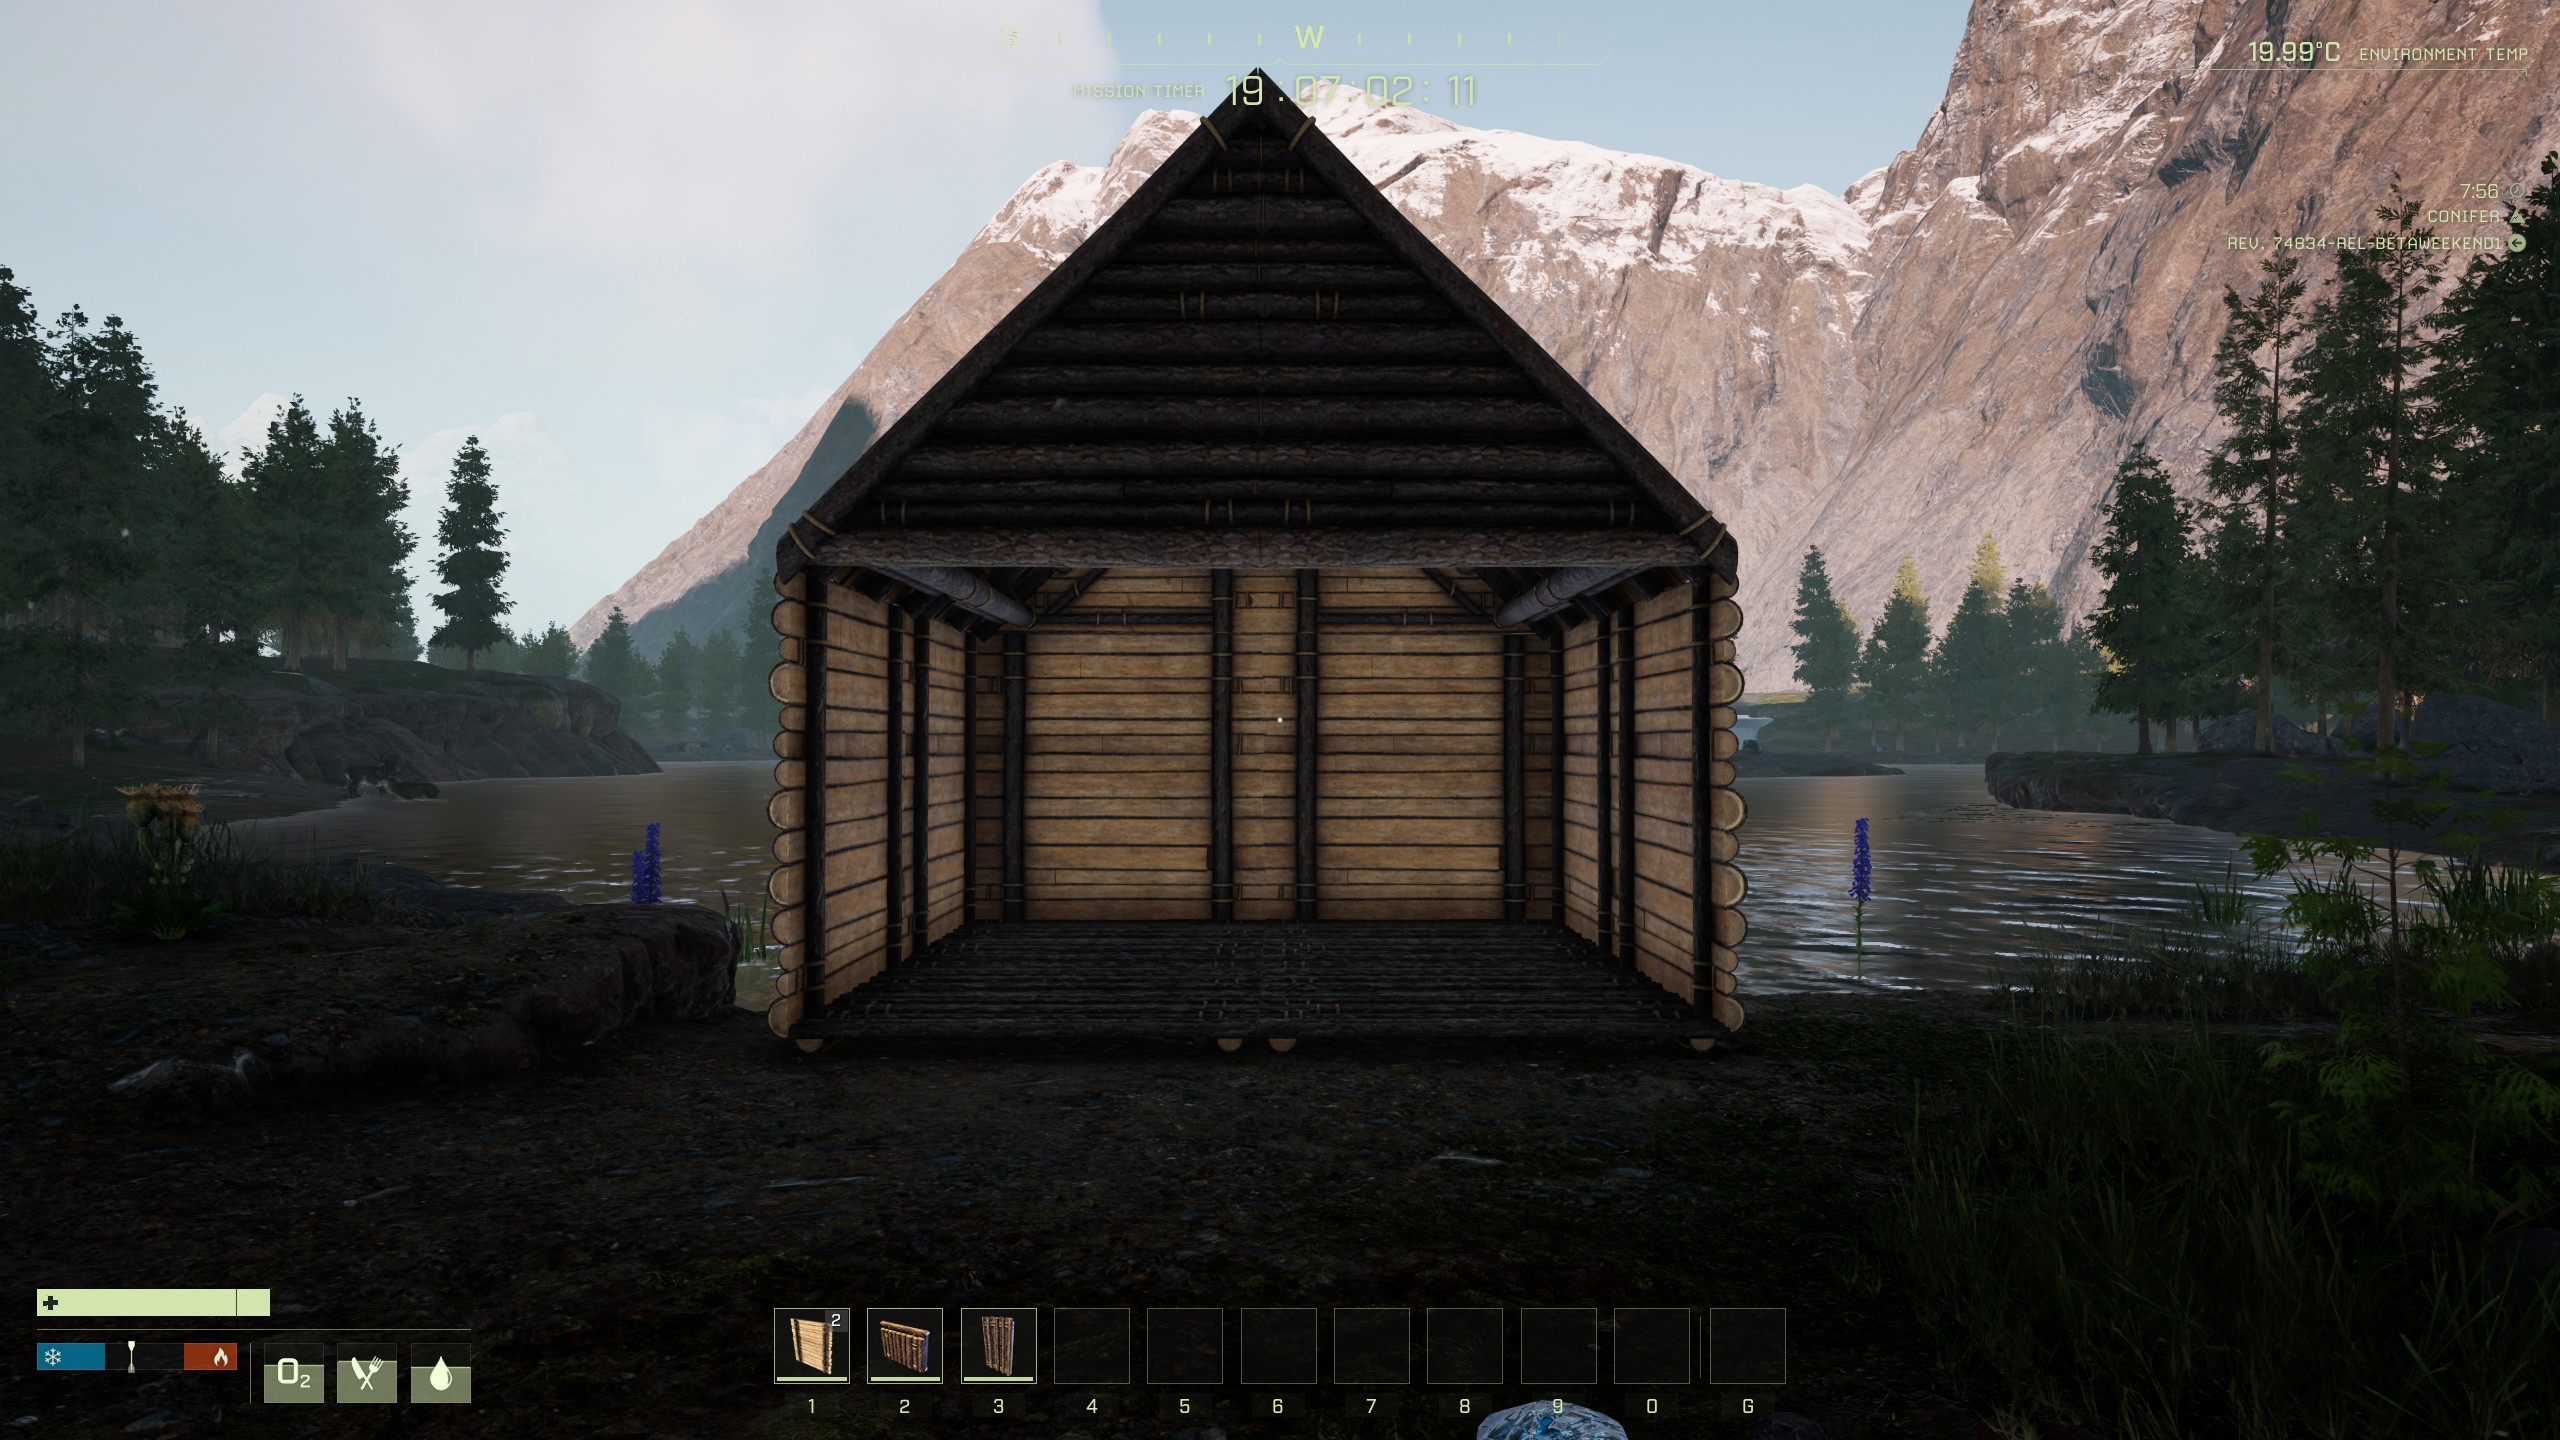 Icarus Beta Basic Guide for Building a House - Step 2: Start your structure, you should have floors place! - 3BB1A67